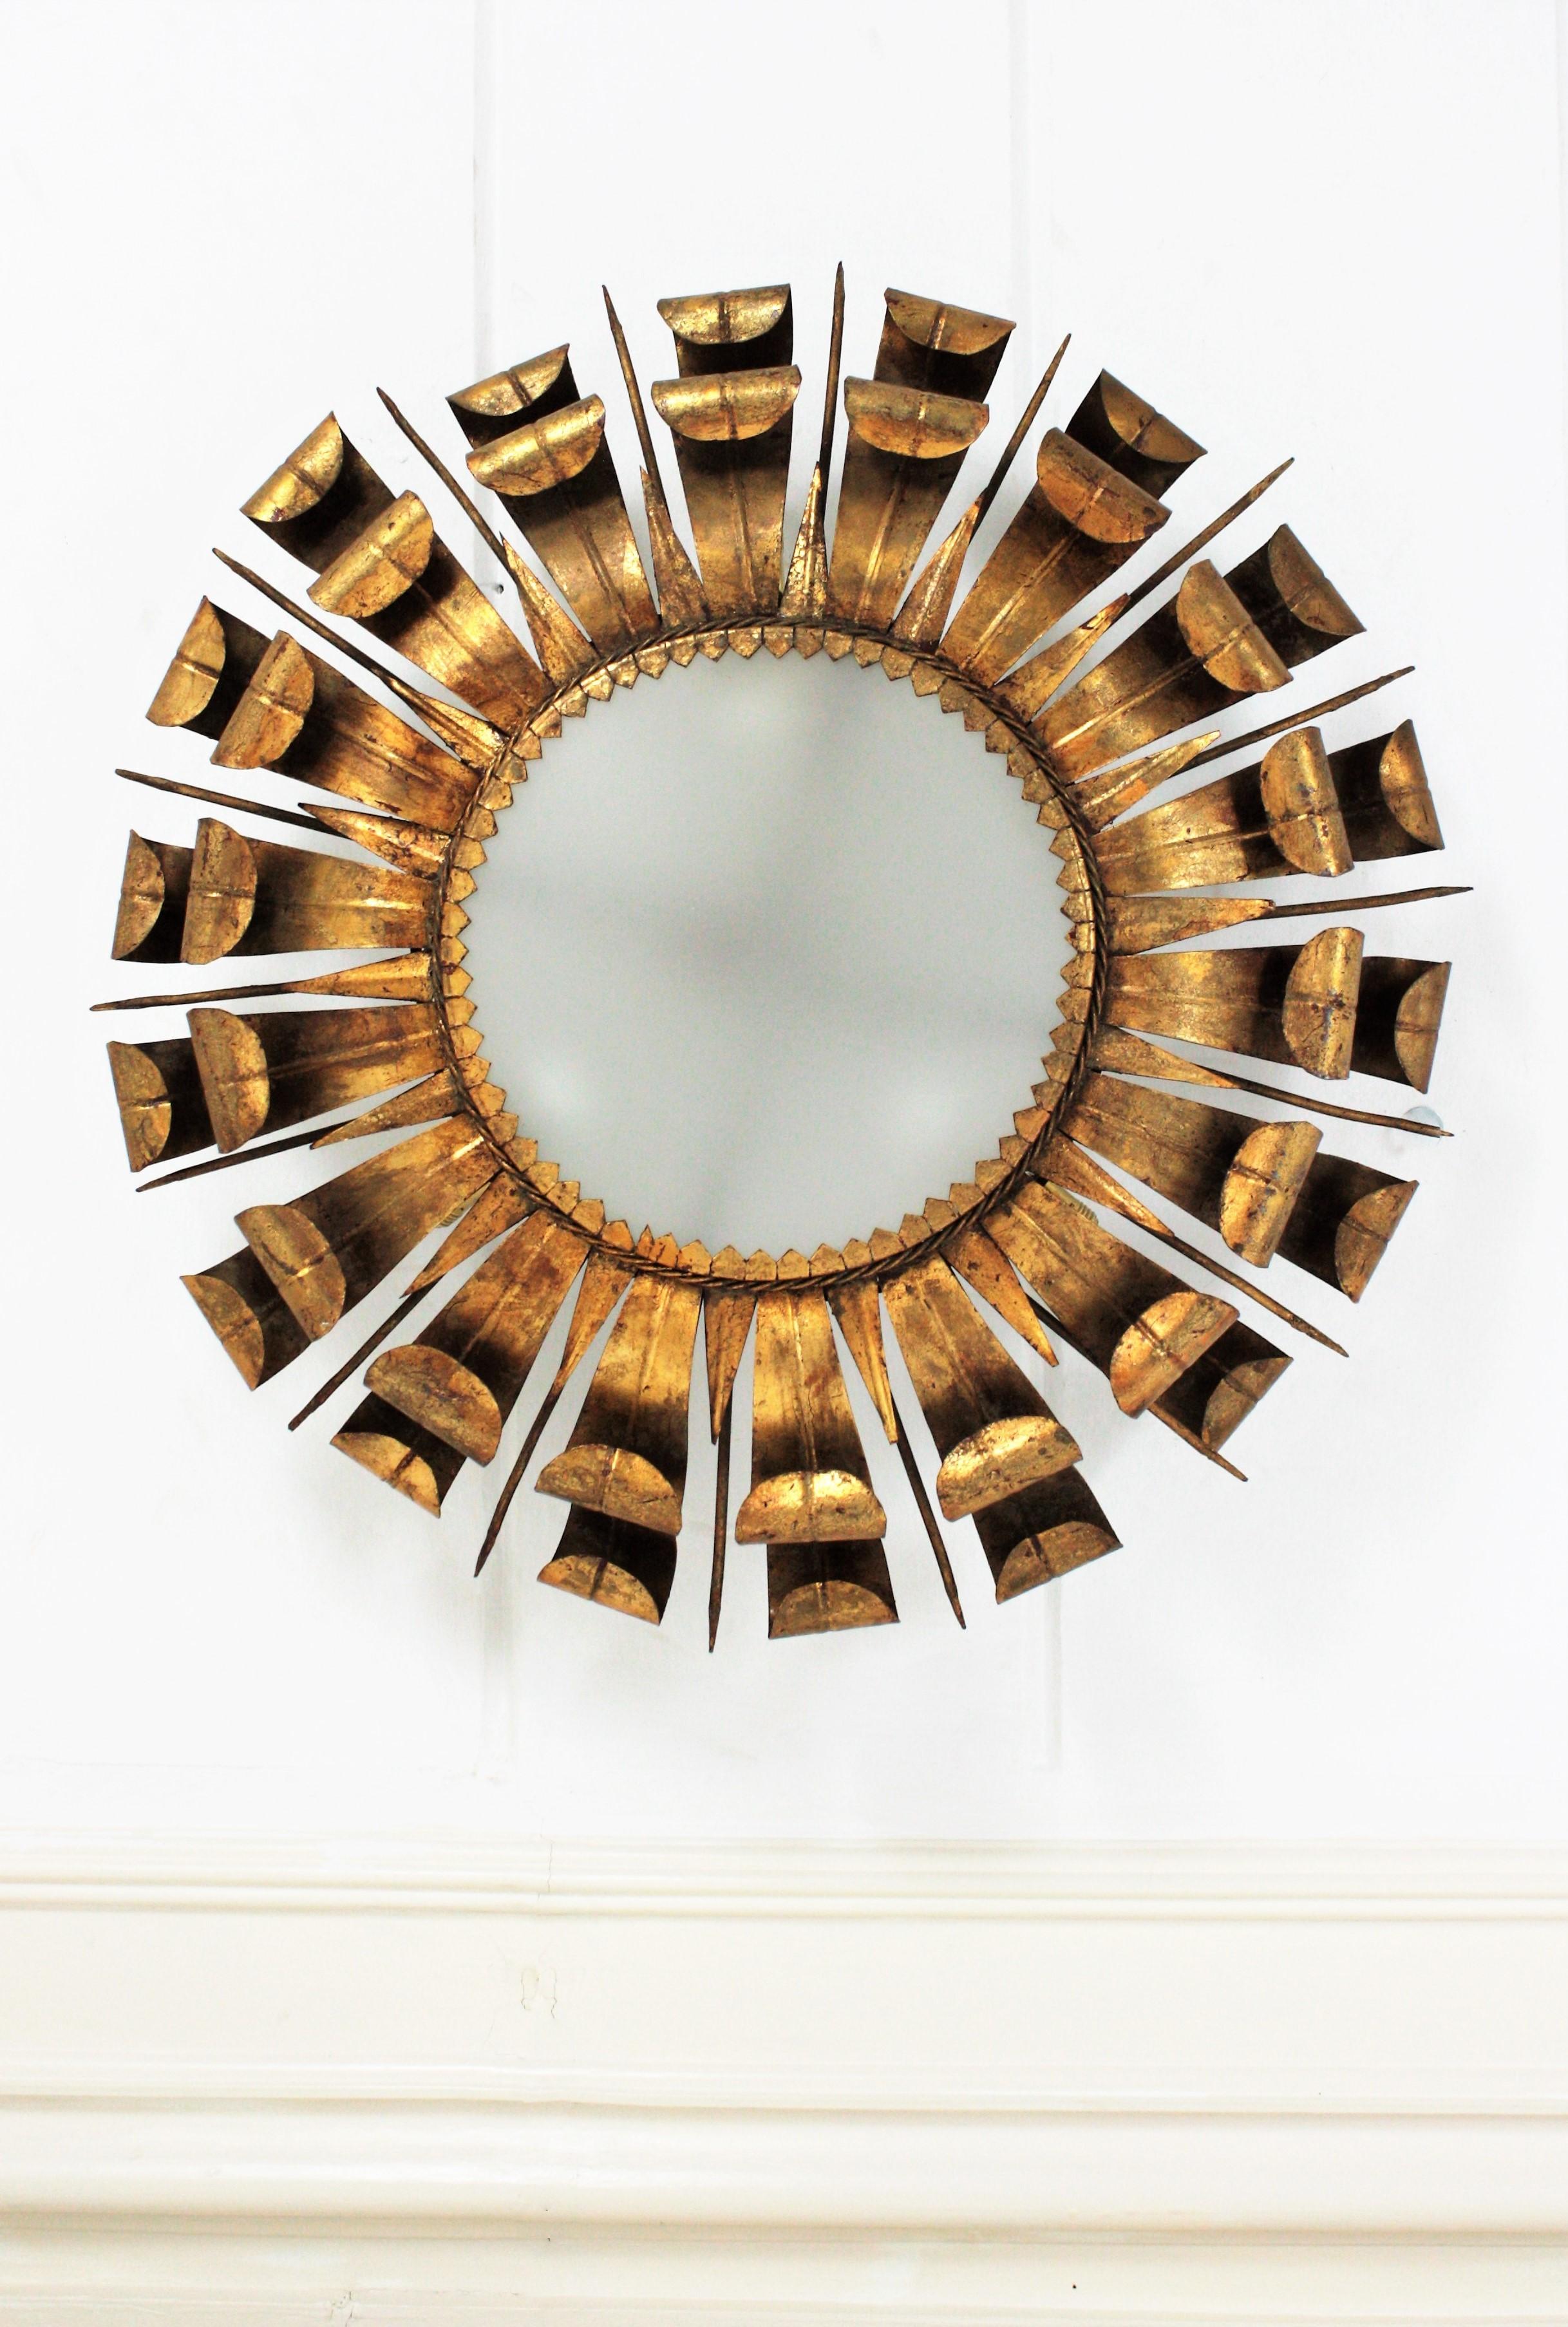 A gorgeous double layered eyelash sunburst ceiling flush mount or pendant with nail accents, France, 1950s.
The frame is made by a double layer of wrought iron curved beams with scrolled ending accented by pointed iron spikes. It has gold leaf